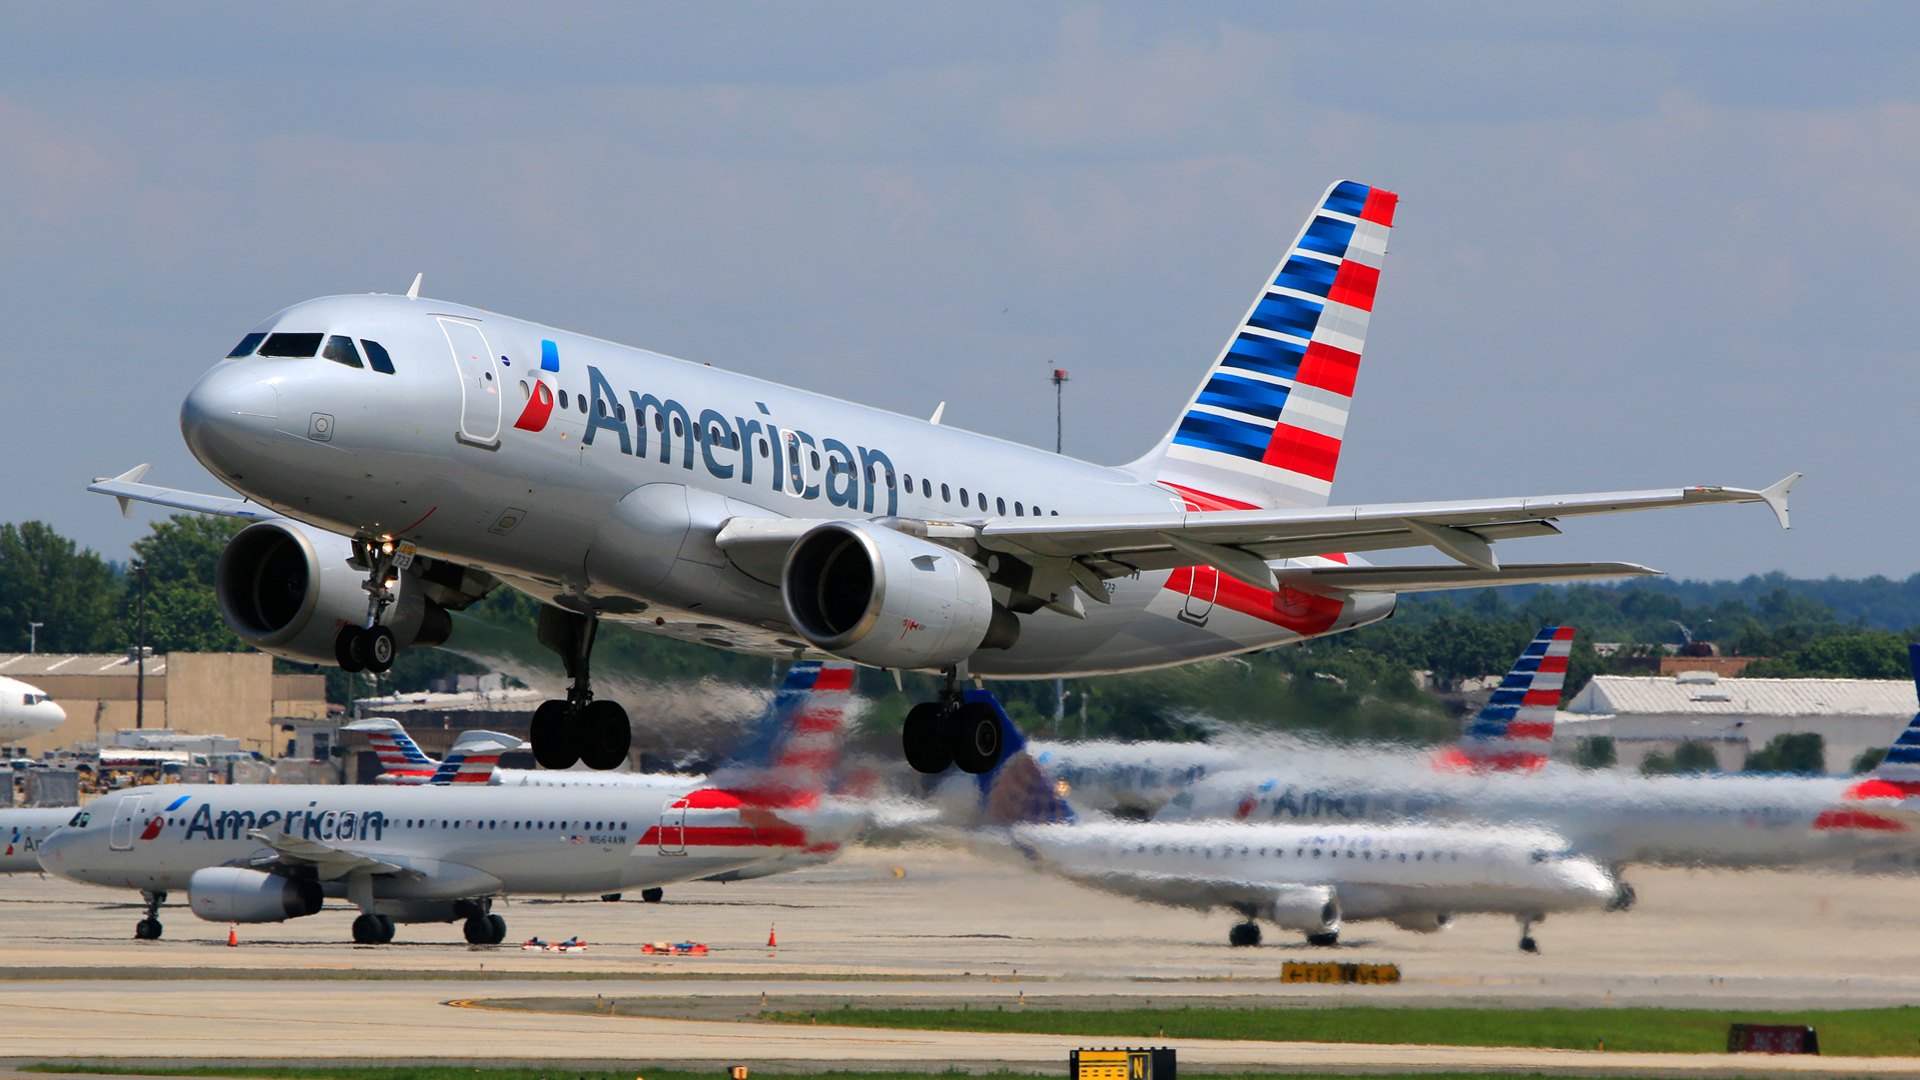 American Airlines Sells A Ticket To A Cello And Then Denies It Boarding In Dallas